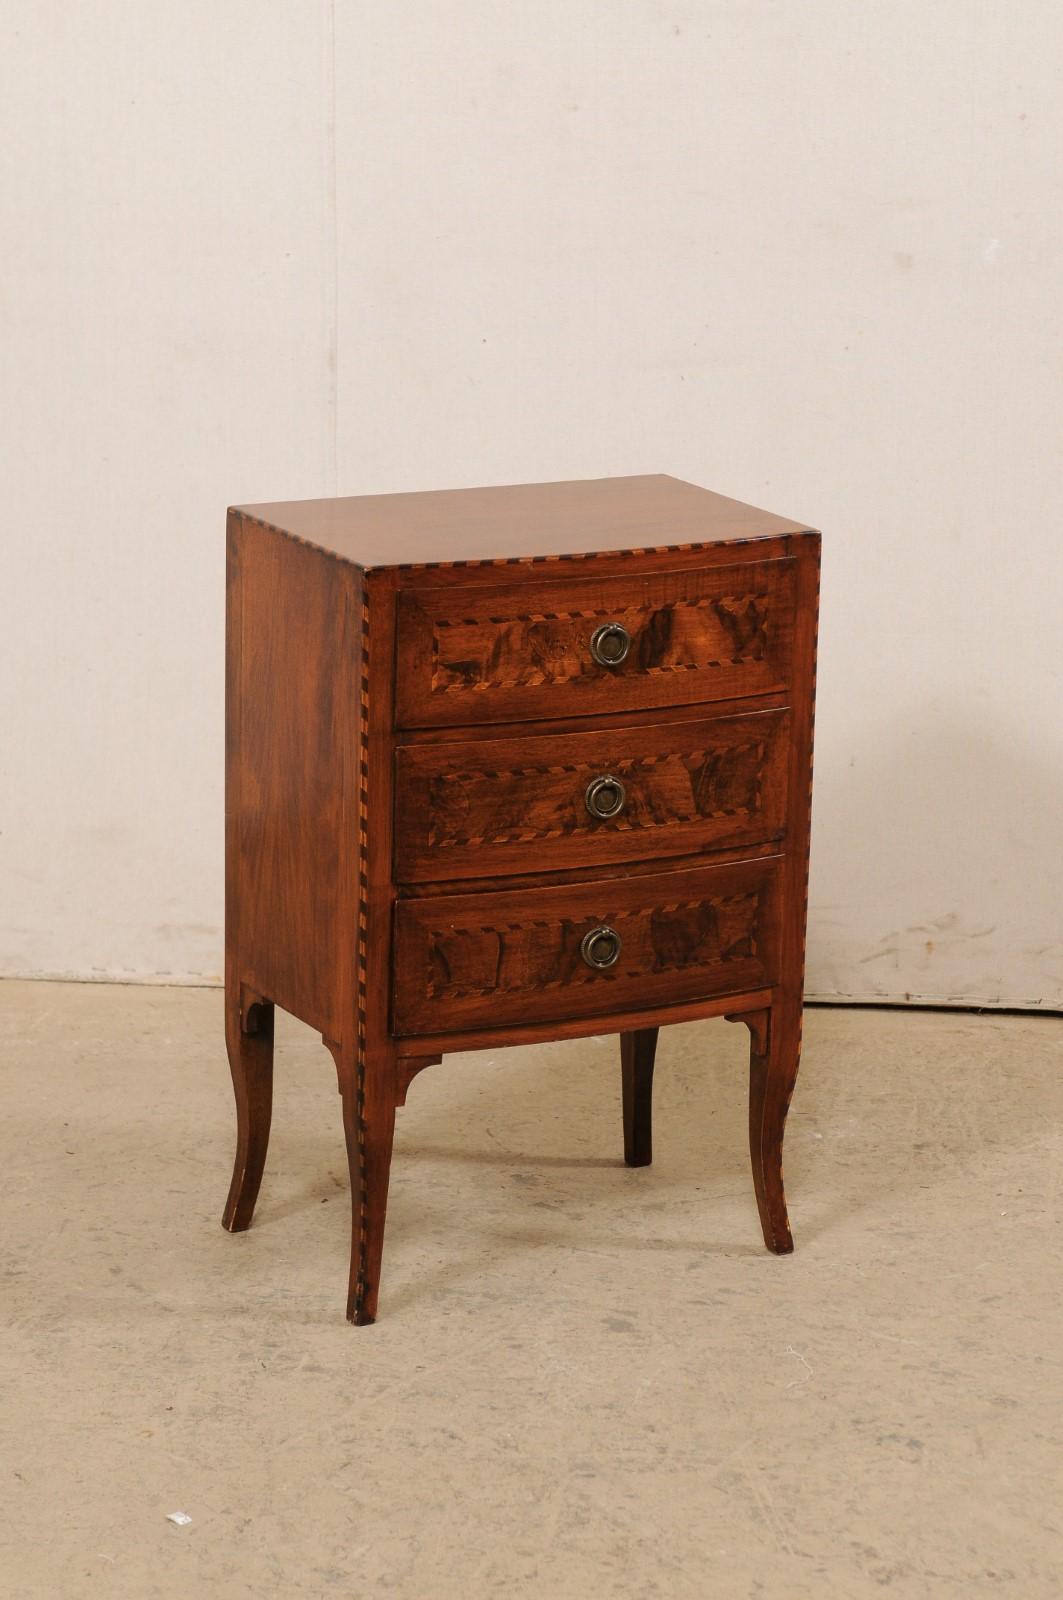 An Italian raised side chest with drawers and decorative inlay from the mid 20th century. This vintage case piece from Italy is adorn with roped inlay banding outlining it's edges, inlayed drawer fronts, and down the curvy lines of it's front legs.